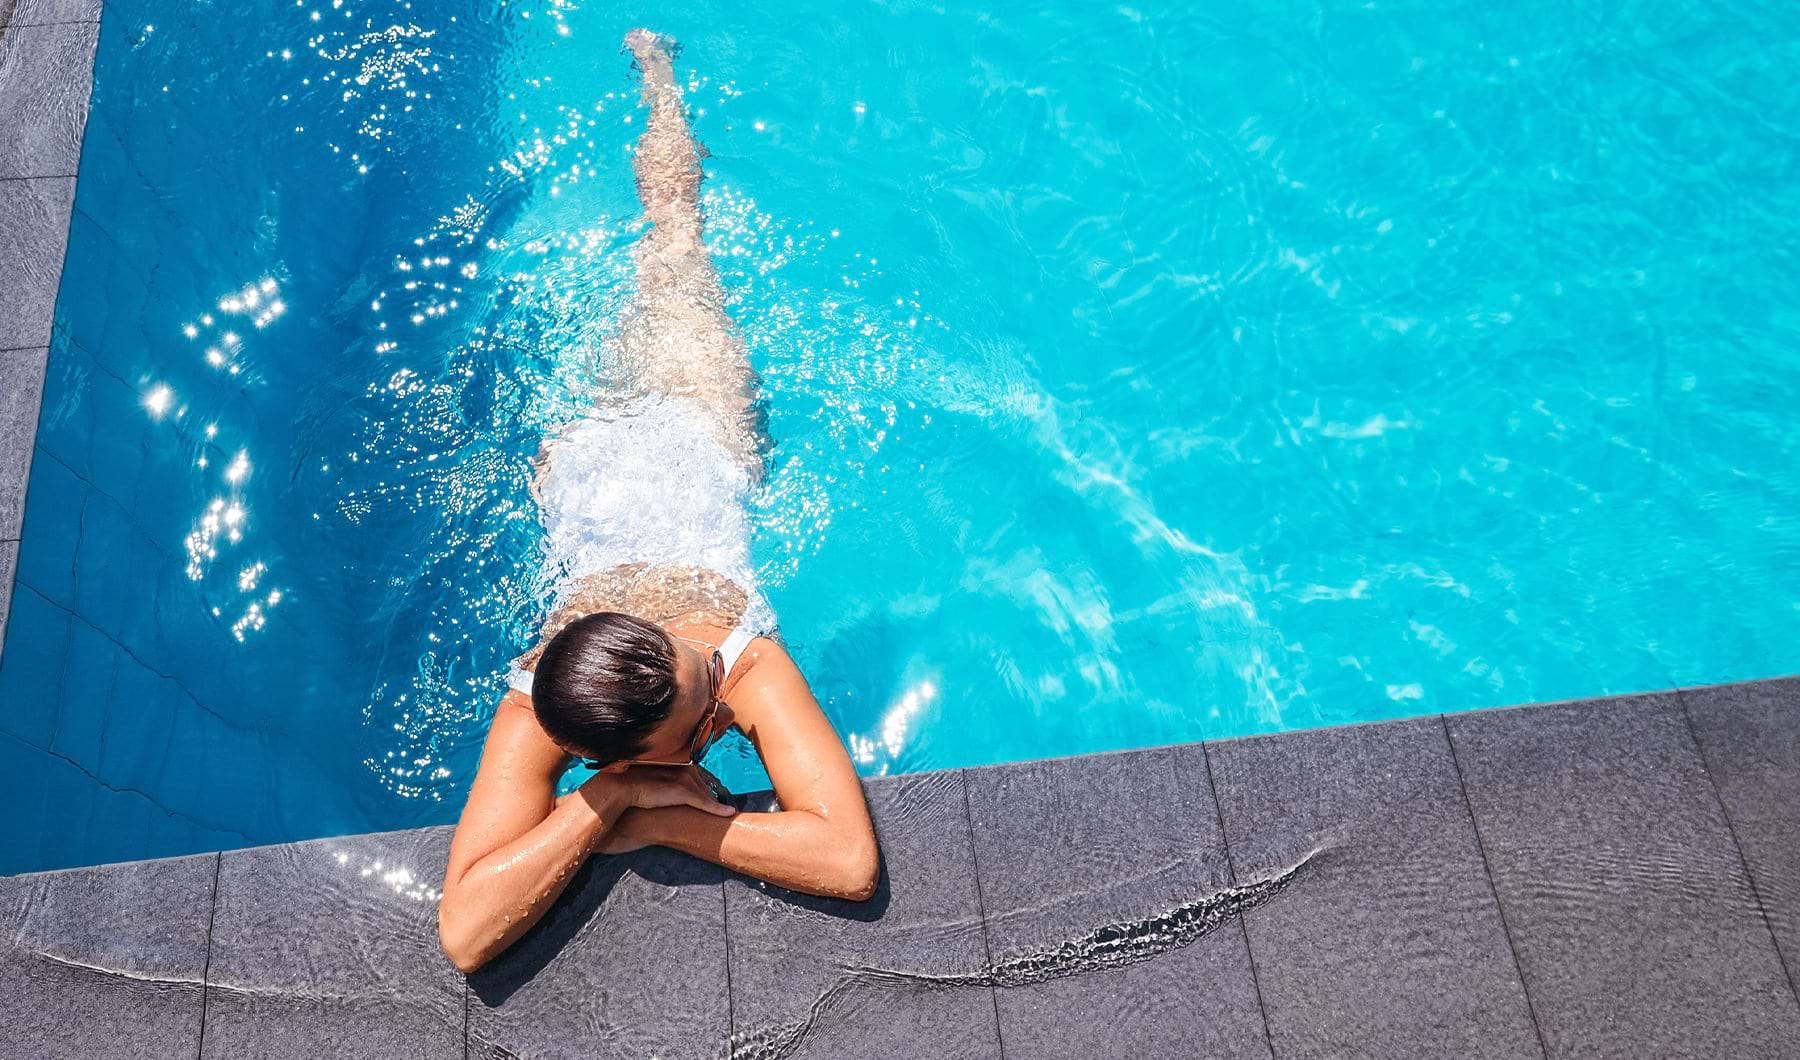 A women is relaxing in a sparkling blue pool 